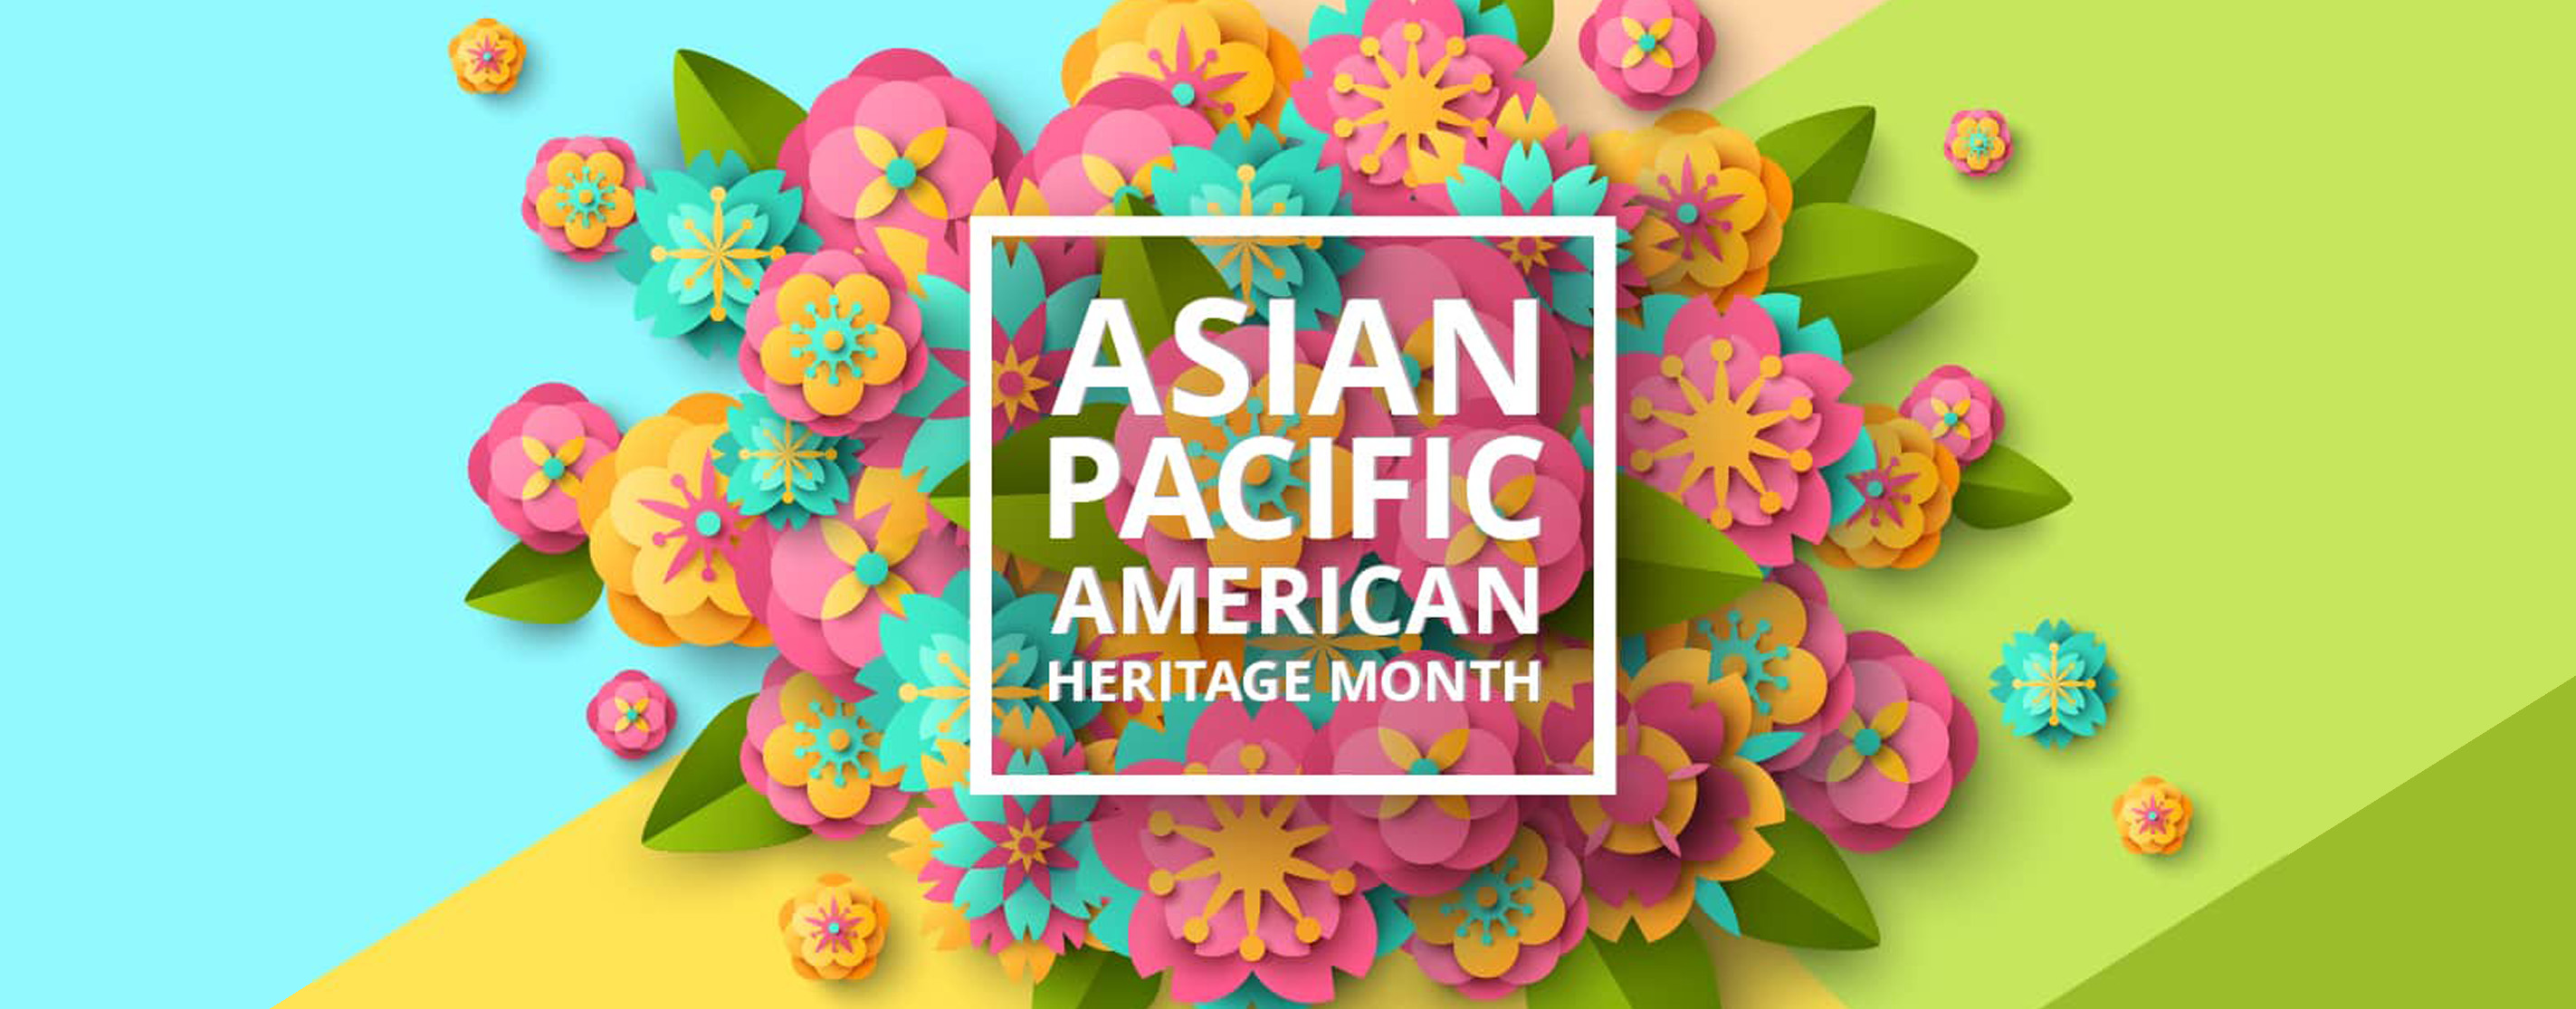 Asian/Pacific American Heritage Month 